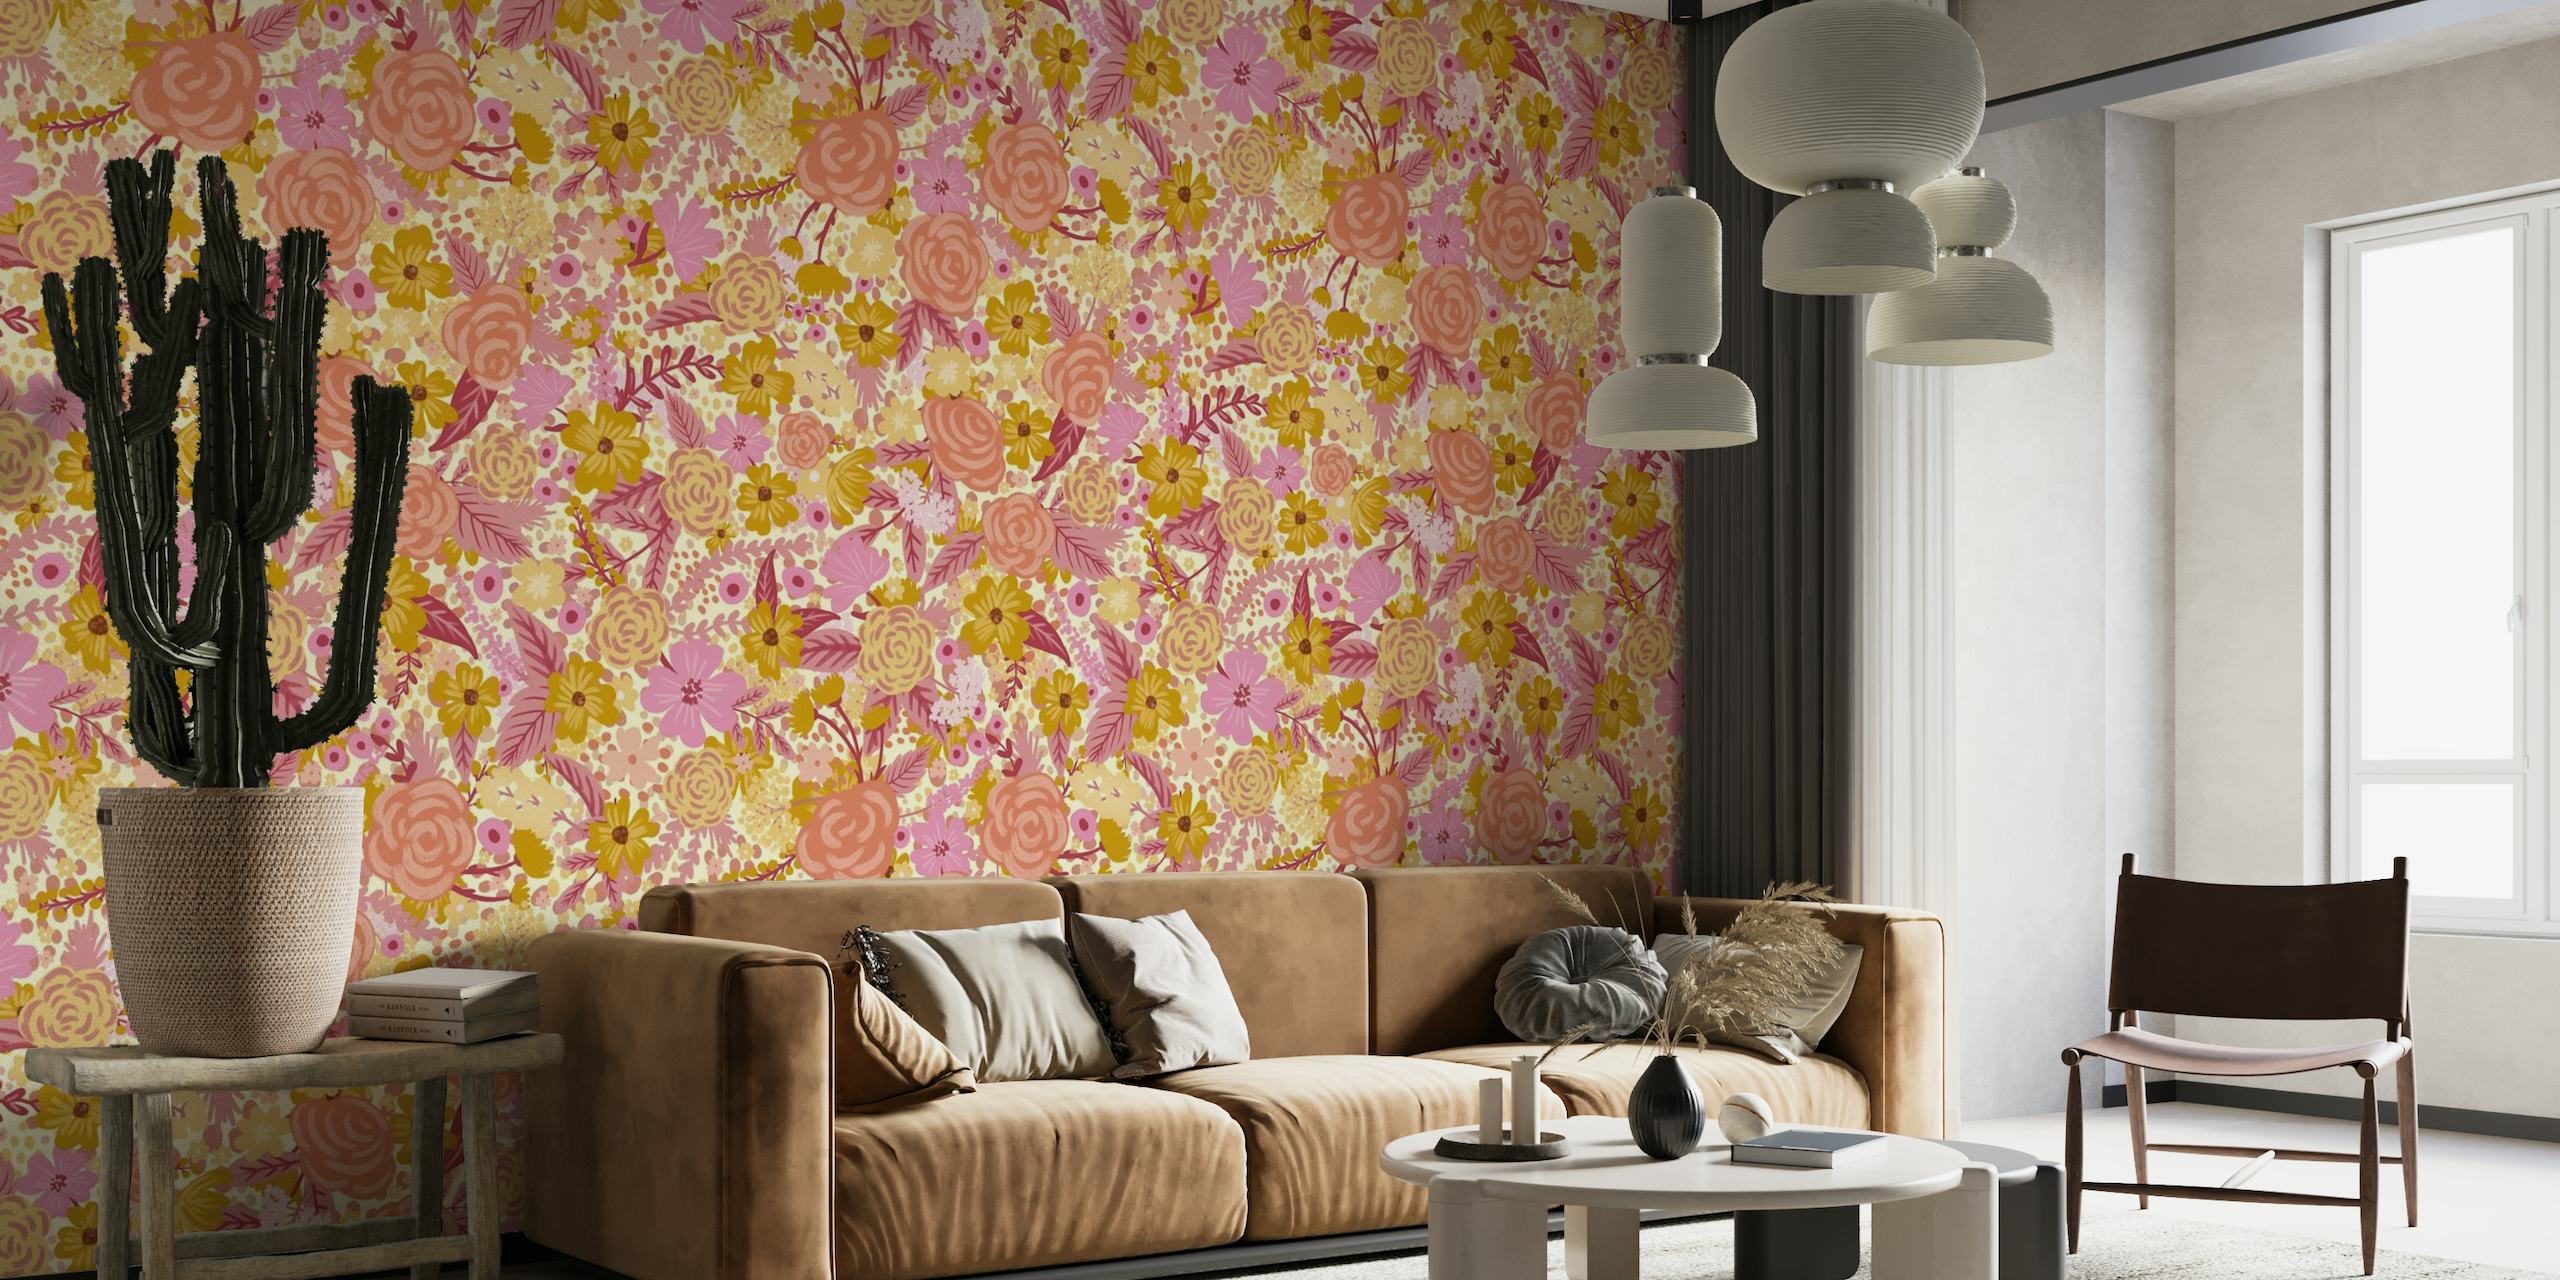 Abstract floral wall mural with soft pinks, gold and neutral tones, featuring roses and daisies in an intangible pattern